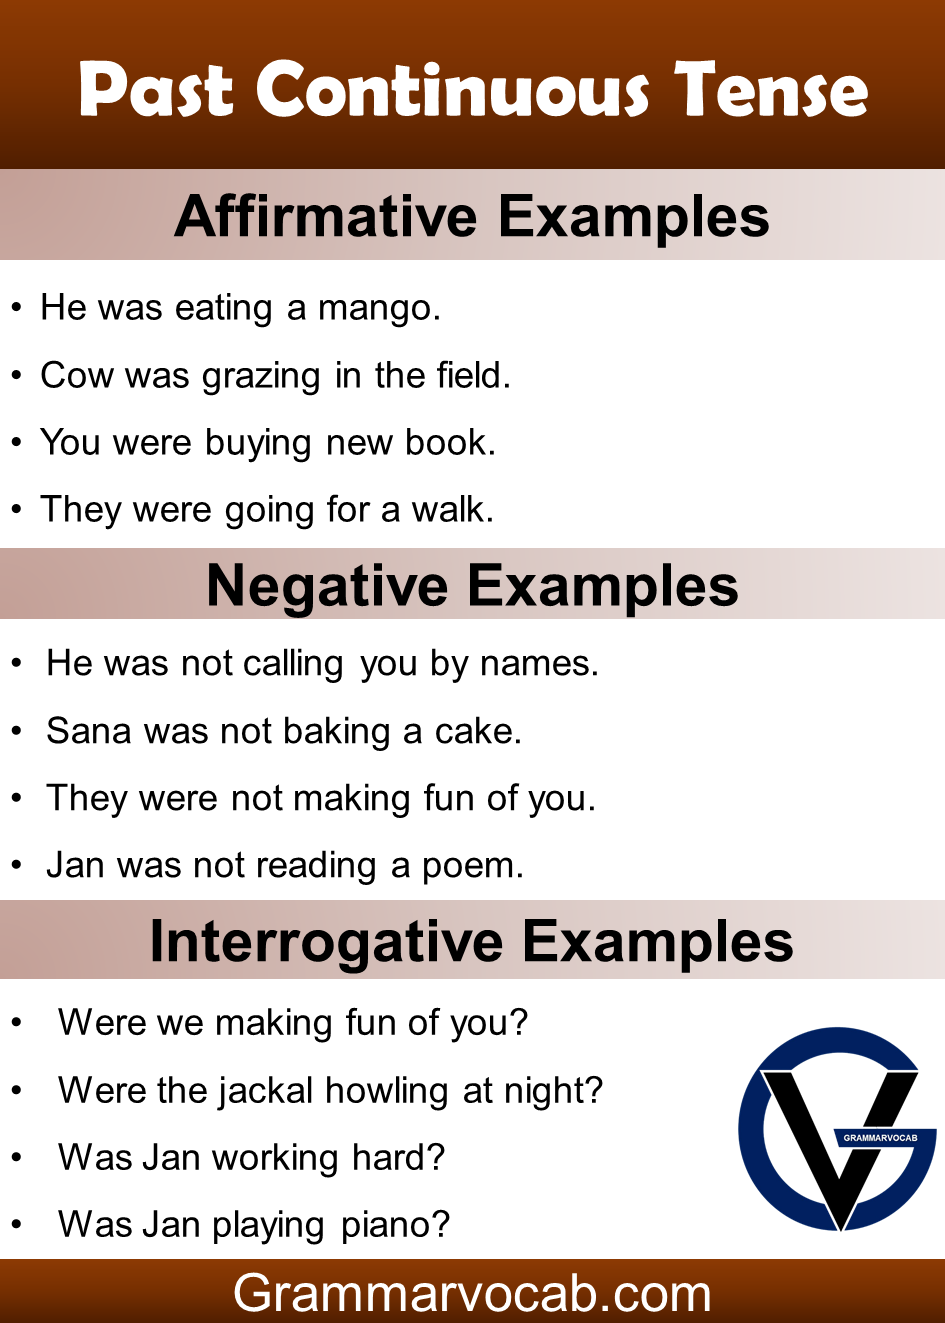 past continuous tense examples